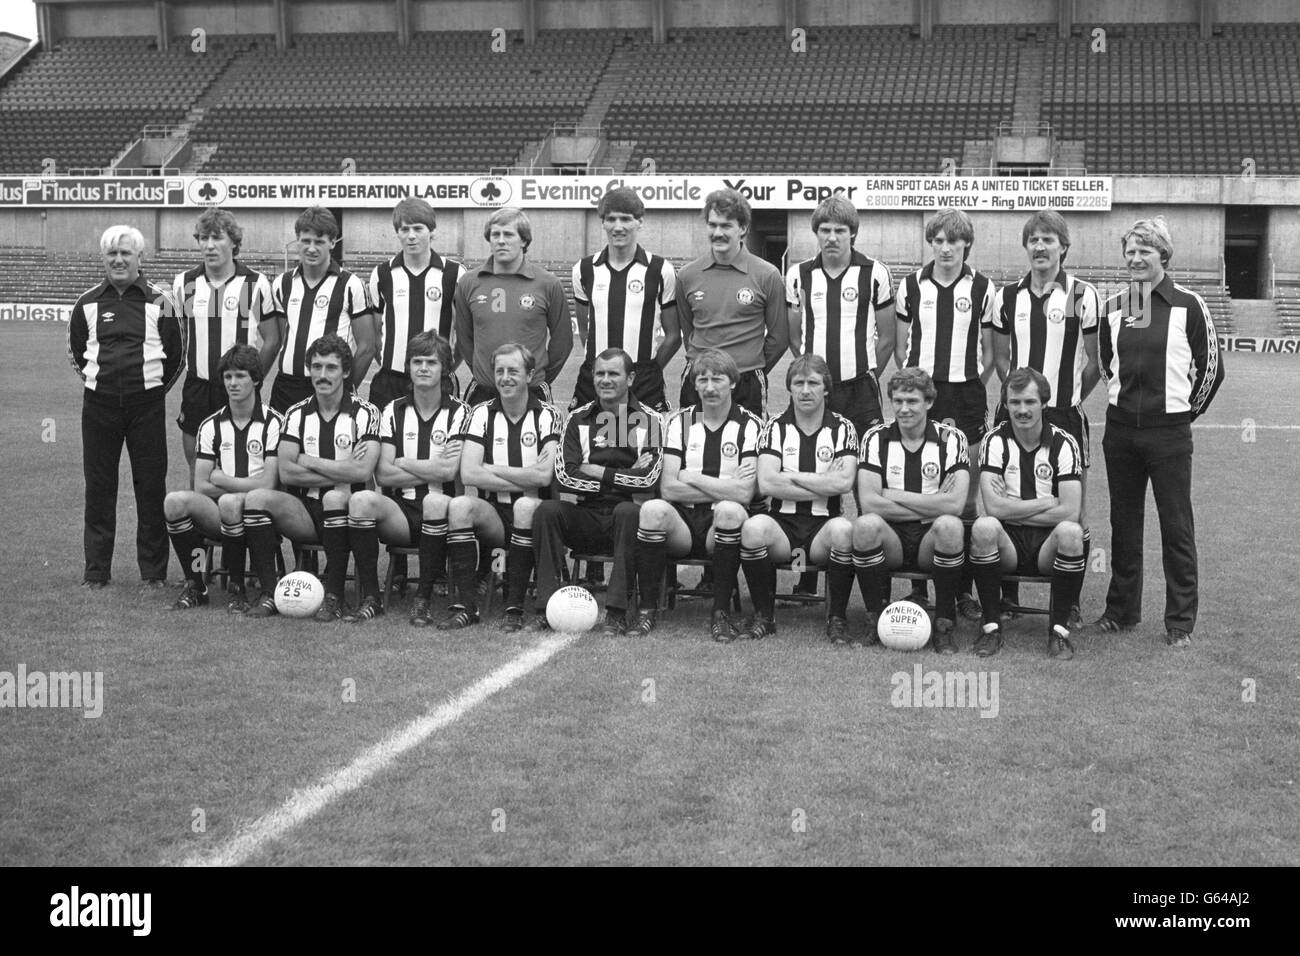 The Second Division Newcastle United squad line up at their St James's Park ground. (Back row, from left) Tommy Cavanagh, Steve Carney, Bruce Halliday, Chris Waddle, Steve Hardwick, Mick Harford, Kevin Carr, David Barton, Peter Haddocks, Bobby Shinton and Ian McFaul. (Seated, from left) Kenny Wharton, John Trewick, Nigel Walker, Mick Martin, manager Arthur Cox, John Brownlie, Alan Shoulder, Peter Johnson and Ian Davies. Stock Photo